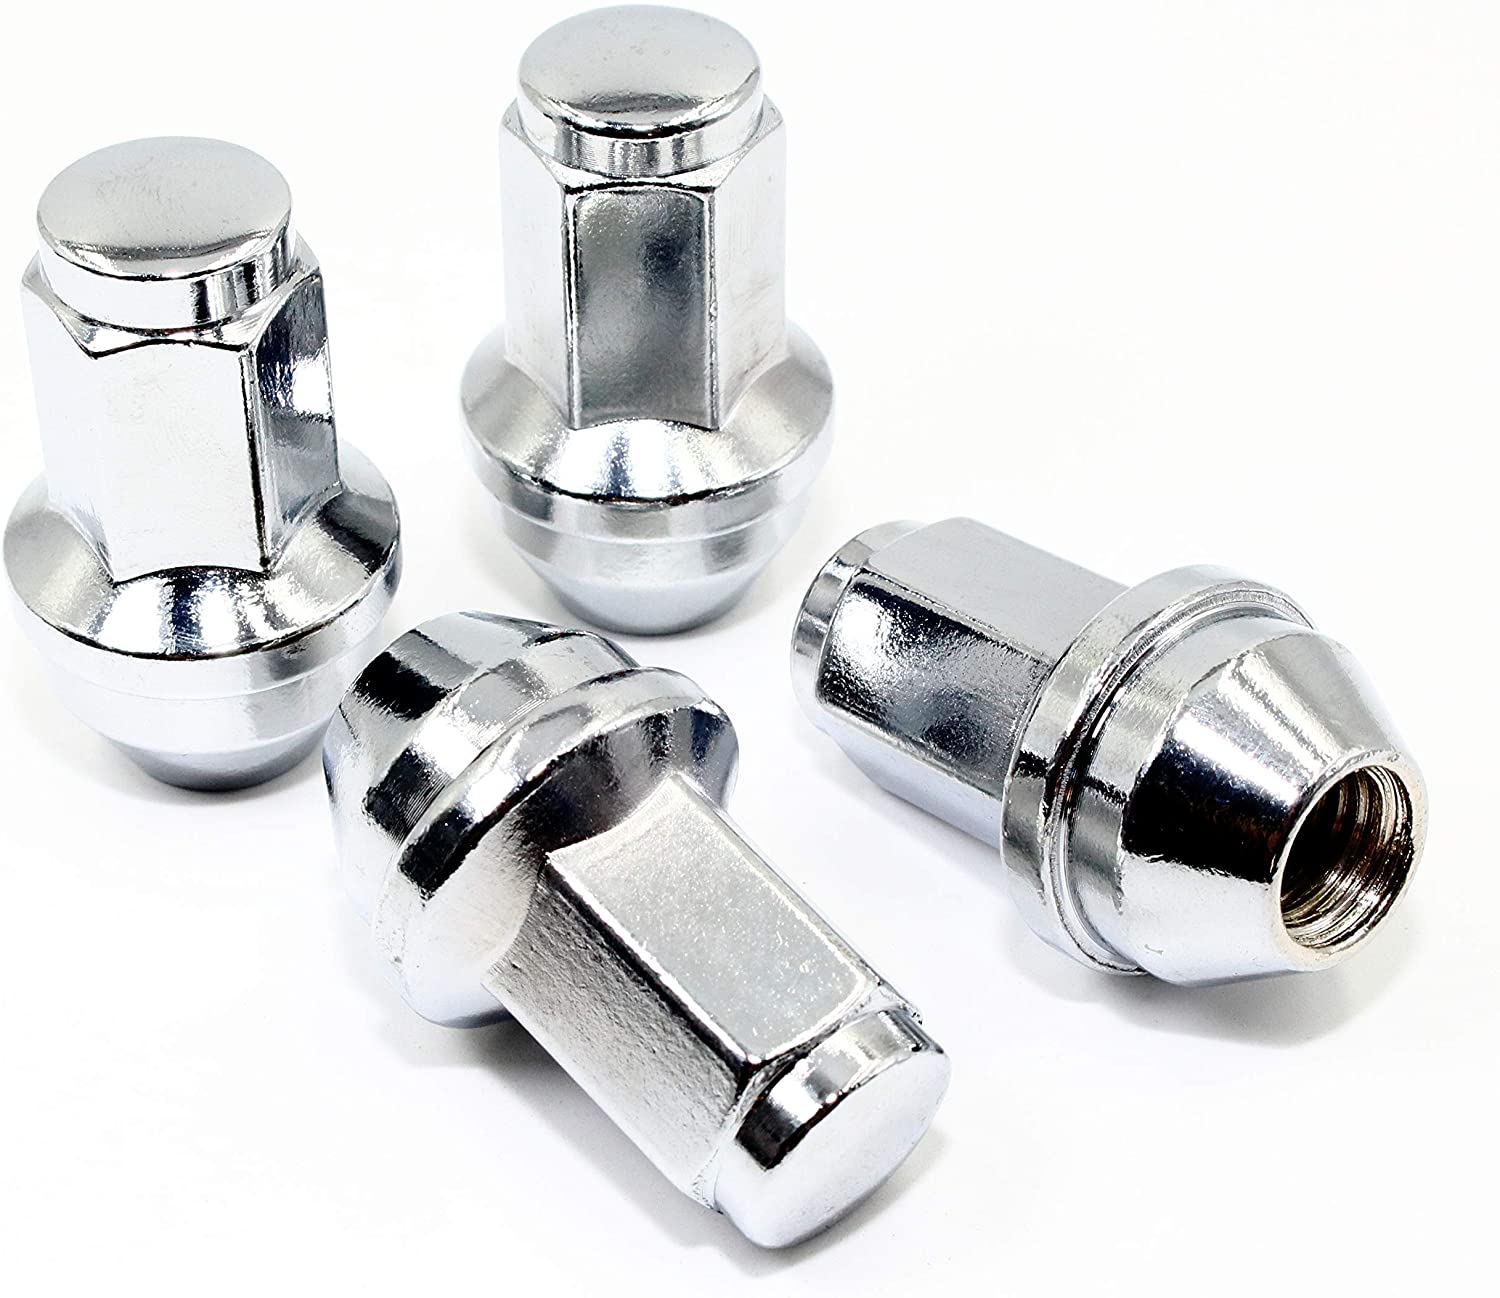 24 Chrome Truck Lug Nuts 14x1.5 For Ford F-150 Expedition SUV Trucks1.9"Tall 